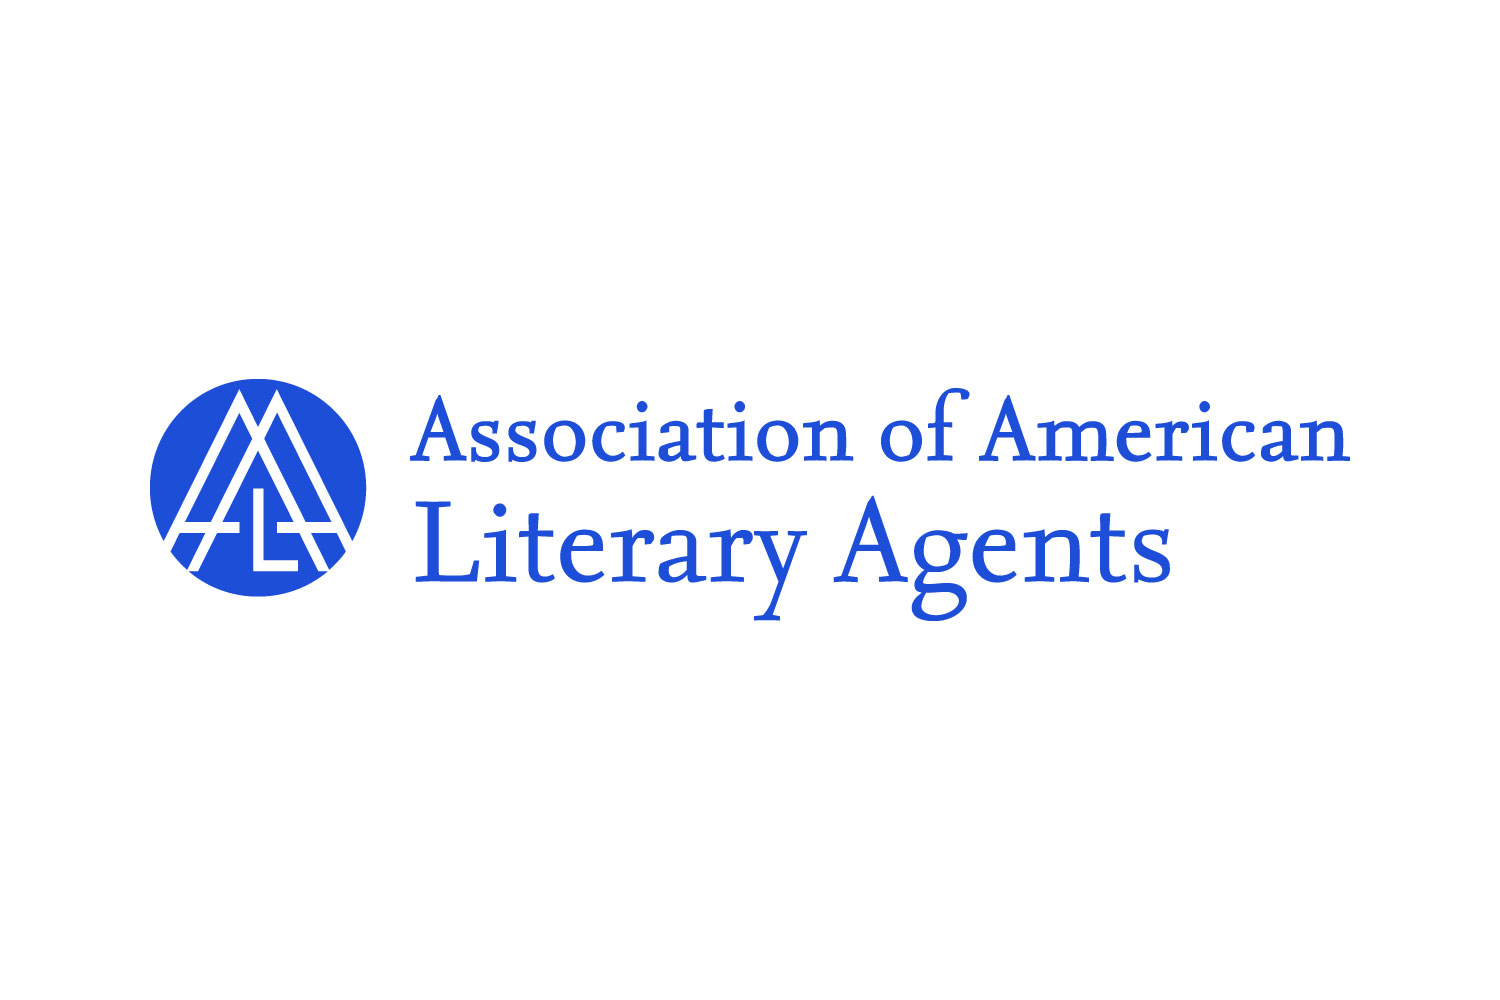 Blue Association of American Literary Agents logo on a white background